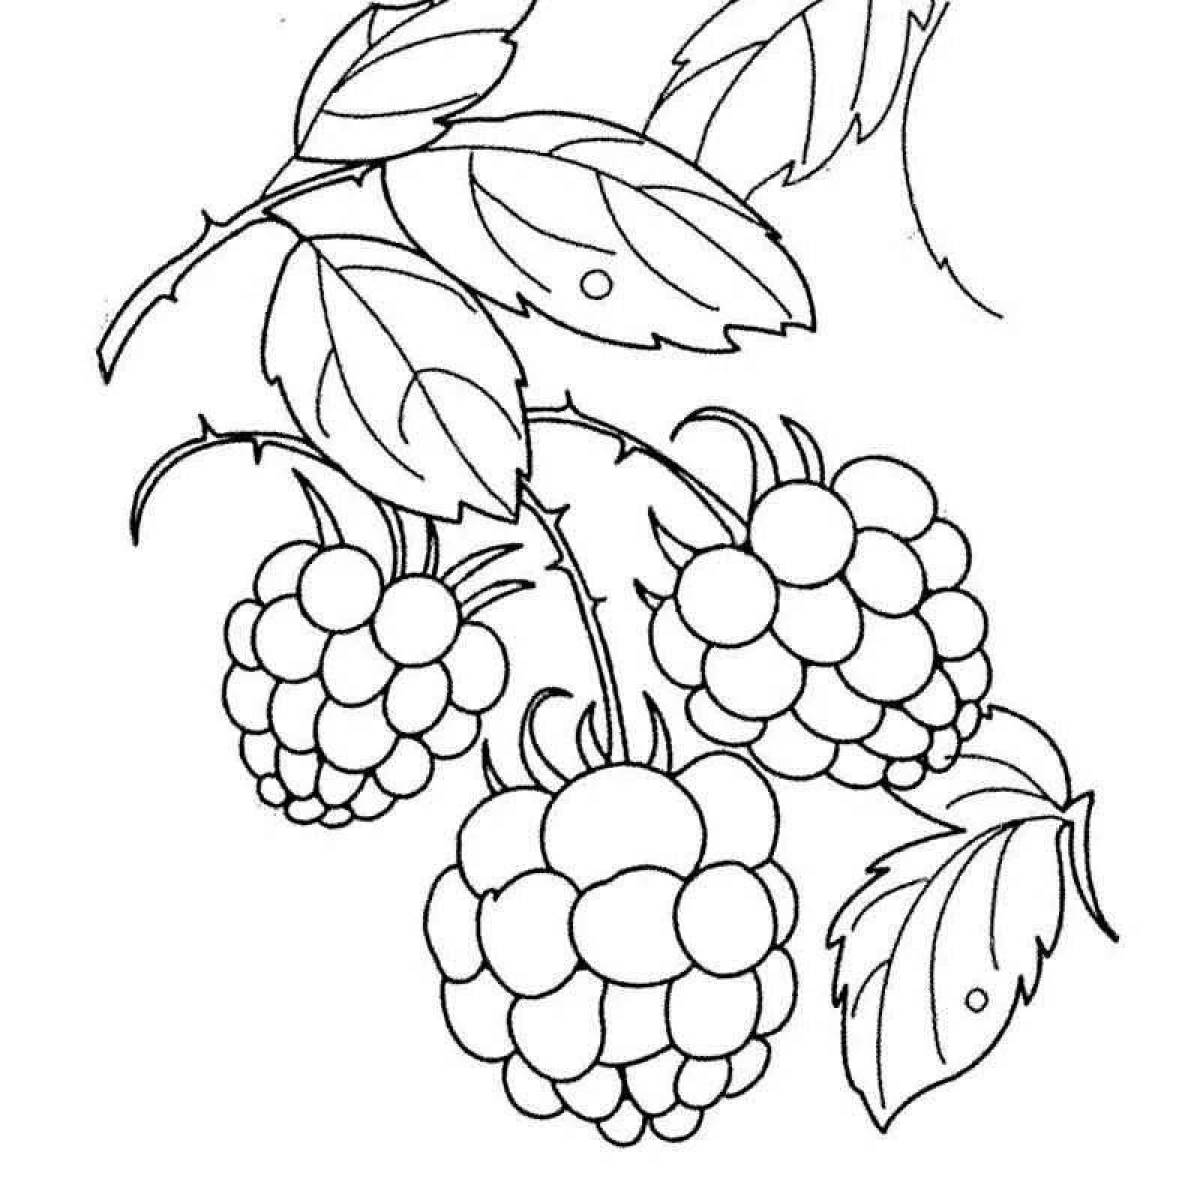 A fun raspberry coloring book for kids